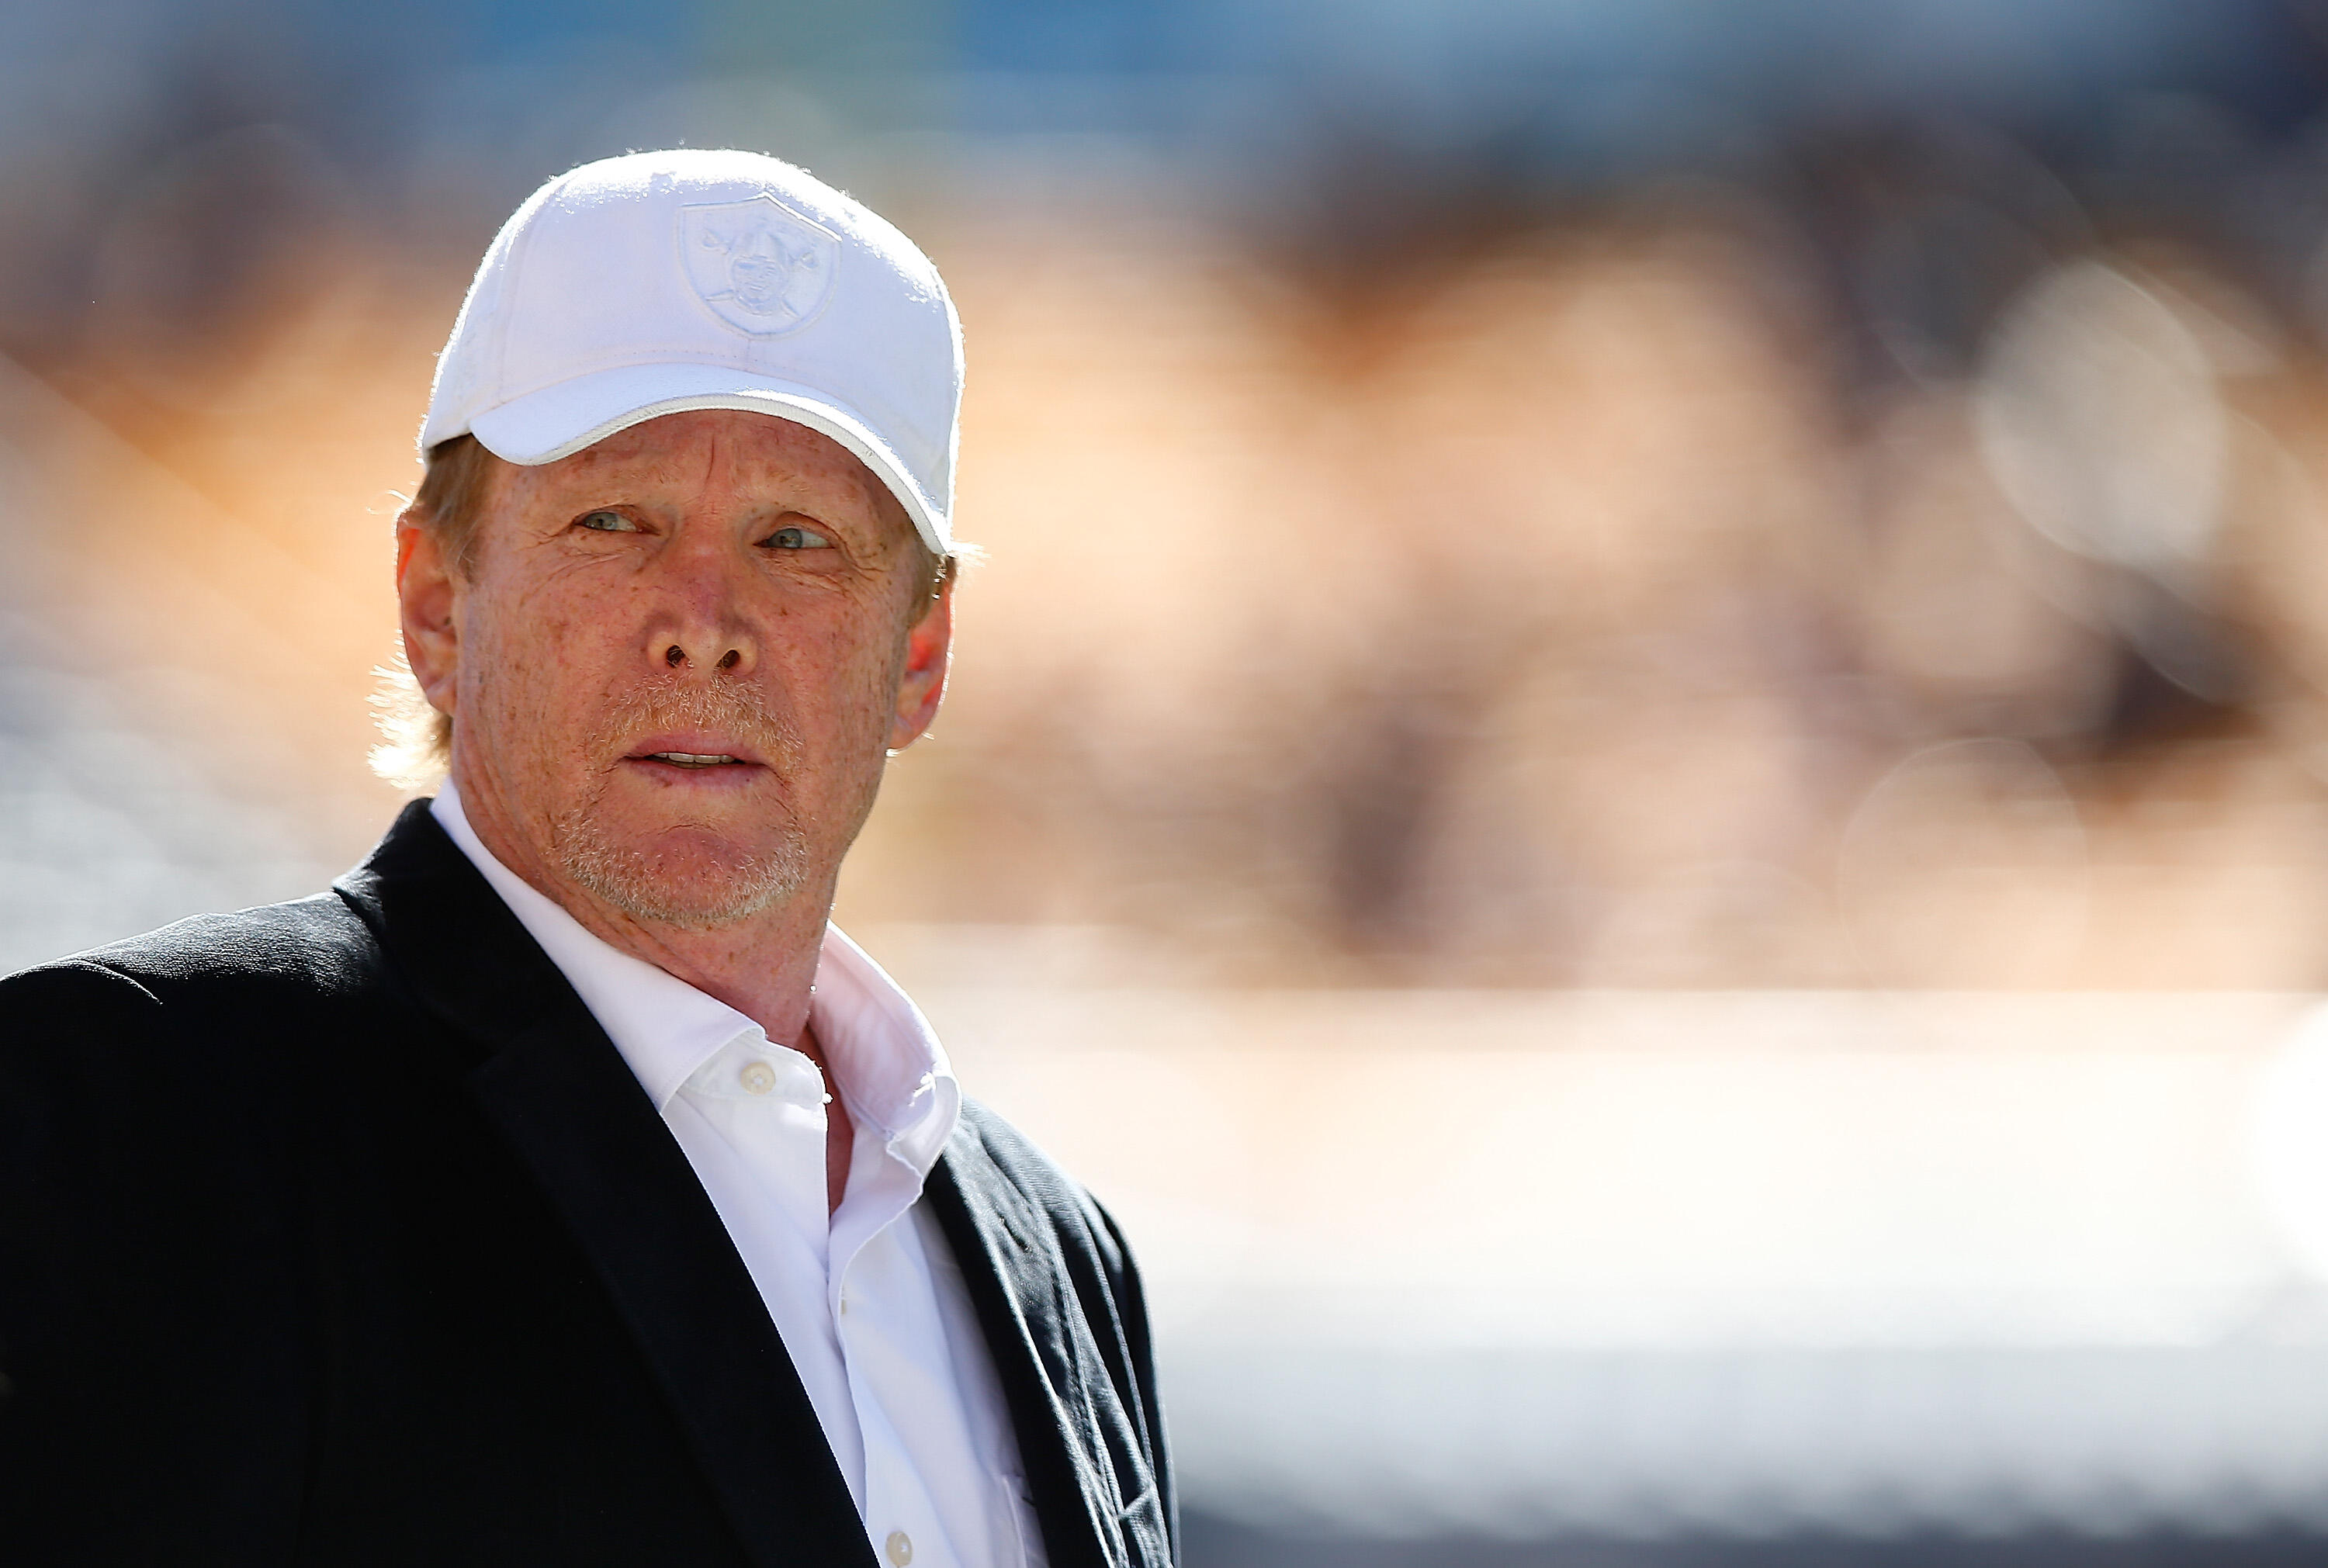 PITTSBURGH, PA - NOVEMBER 08:  Owner Mark Davis of the Oakland Raiders on the field before the start of the game against the Pittsburgh Steelers at Heinz Field on November 8, 2015 in Pittsburgh, Pennsylvania.  (Photo by Jared Wickerham/Getty Images)